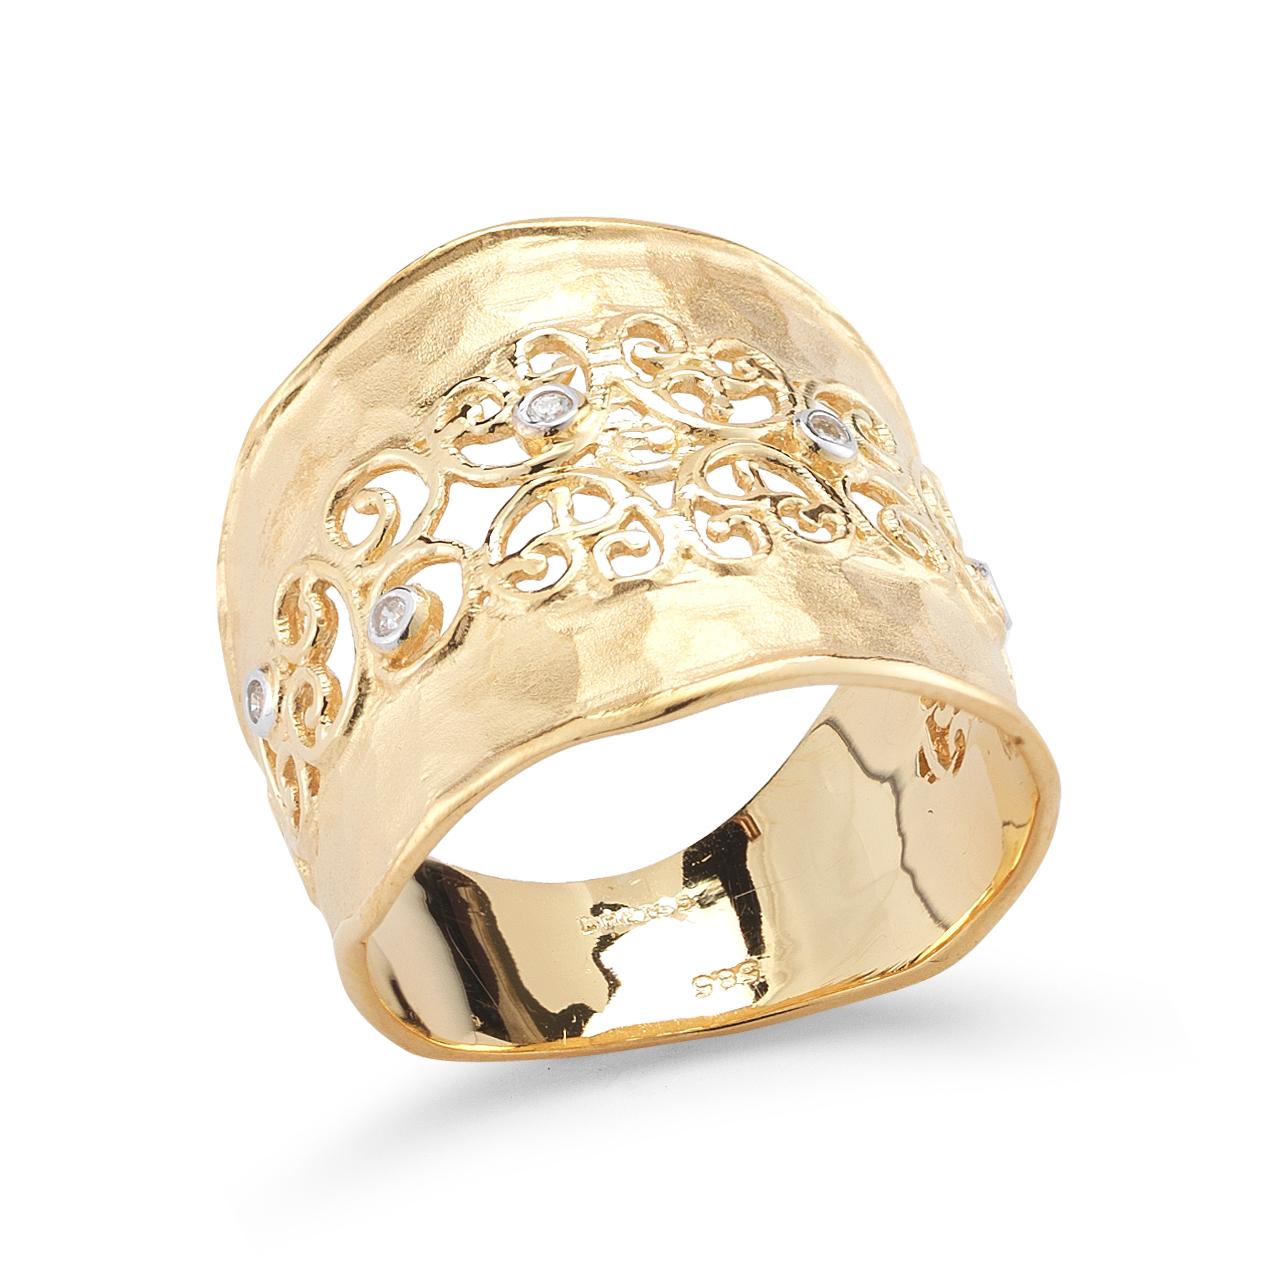 14 Karat Yellow Gold Matte and Hammer-Finished Scallop-Edged Filigree Cigar Ring, Accented with 0.05 Carats of Bezel Set Diamonds.
